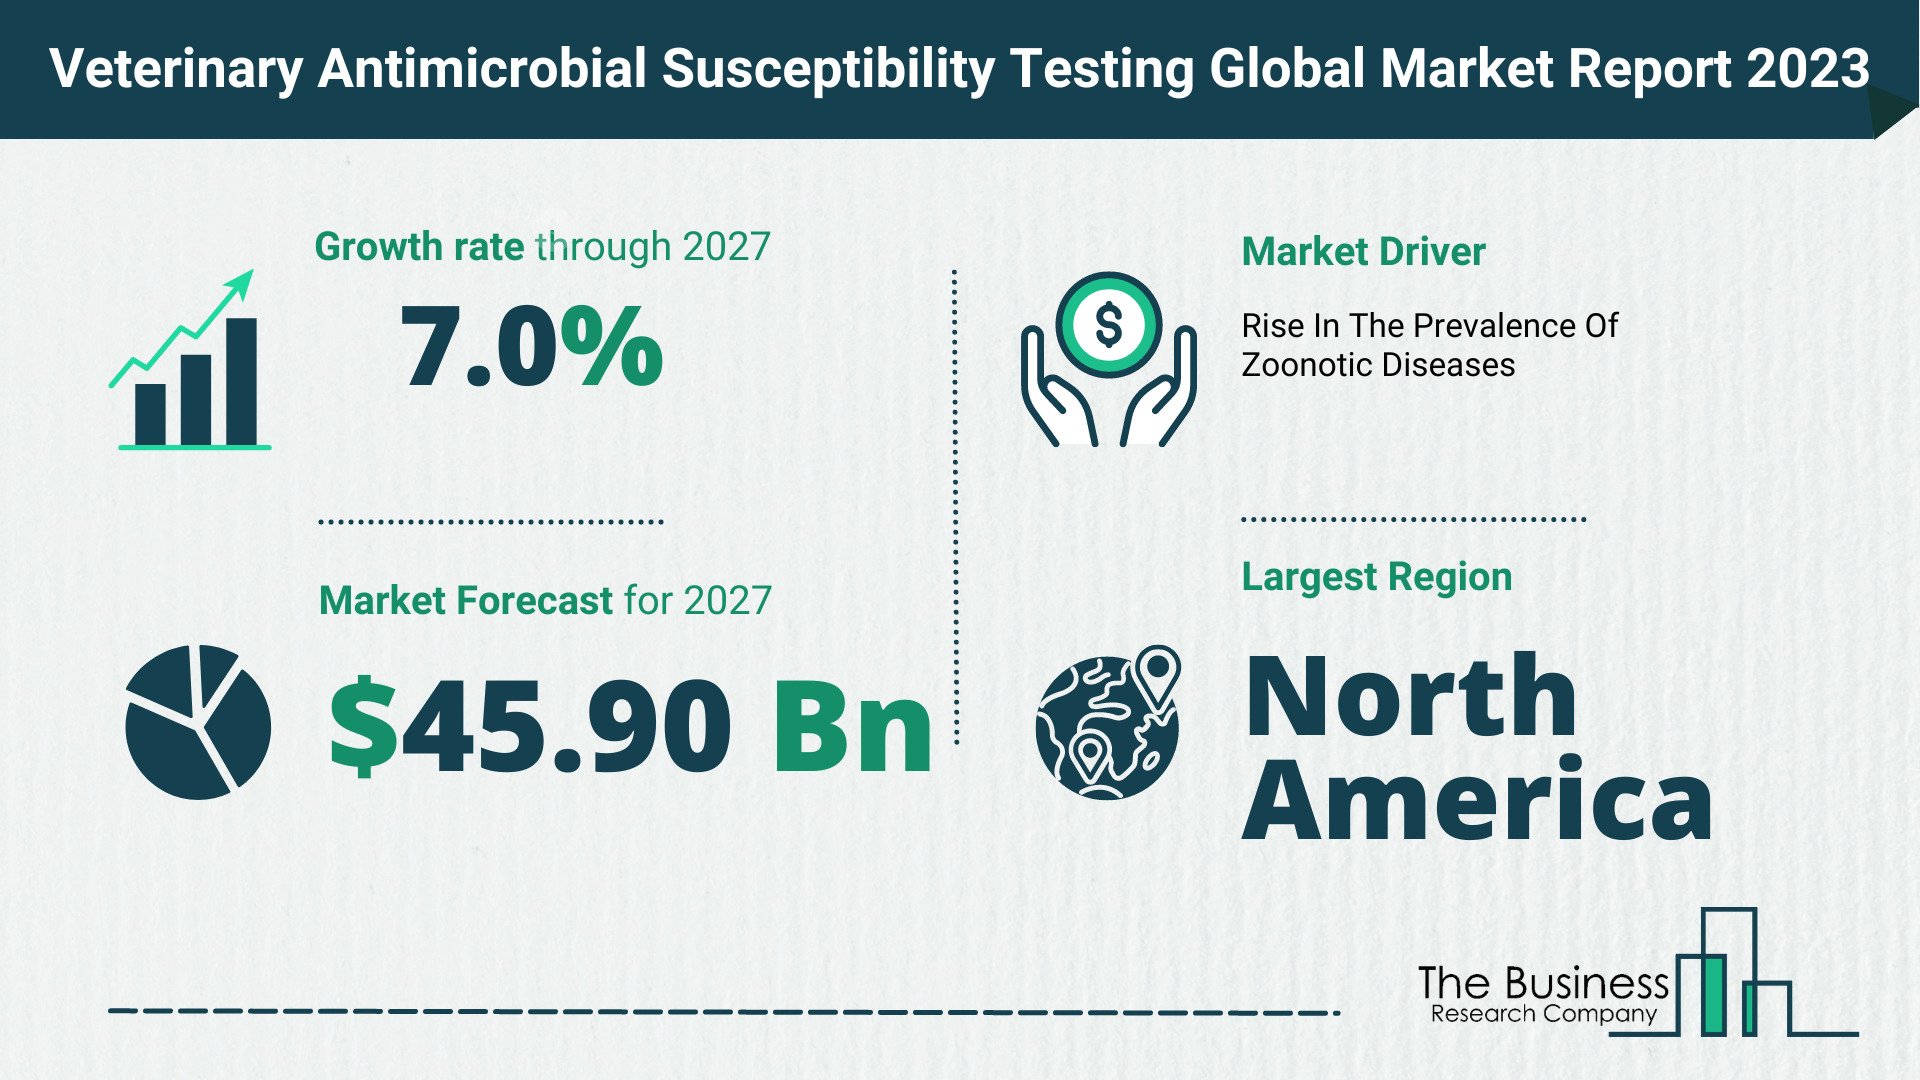 Global Veterinary Antimicrobial Susceptibility Testing Market Size